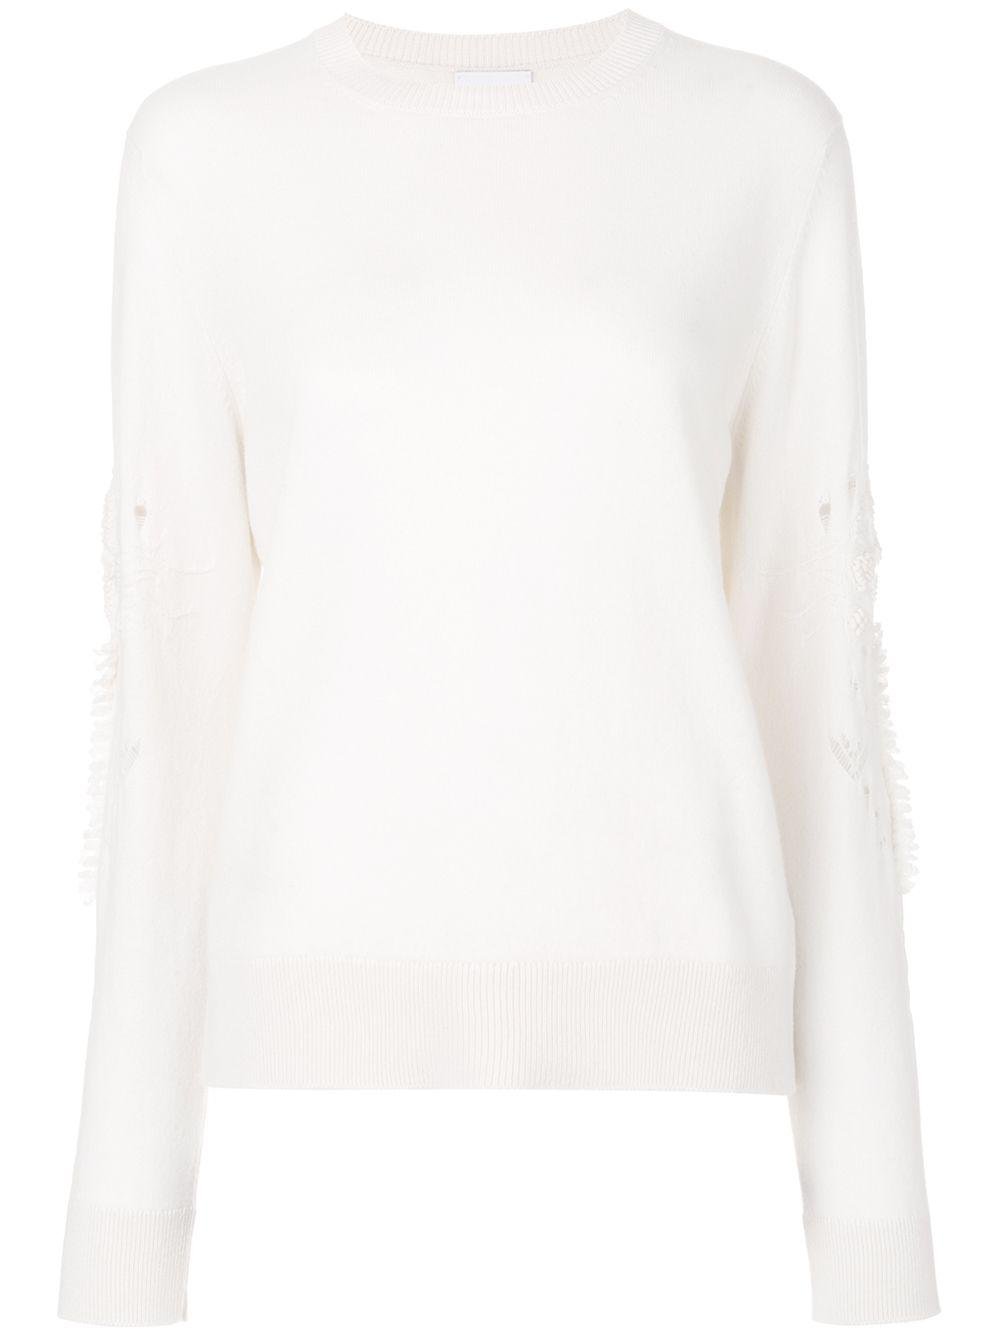 Romantic Timeless cashmere round neck pullover by BARRIE